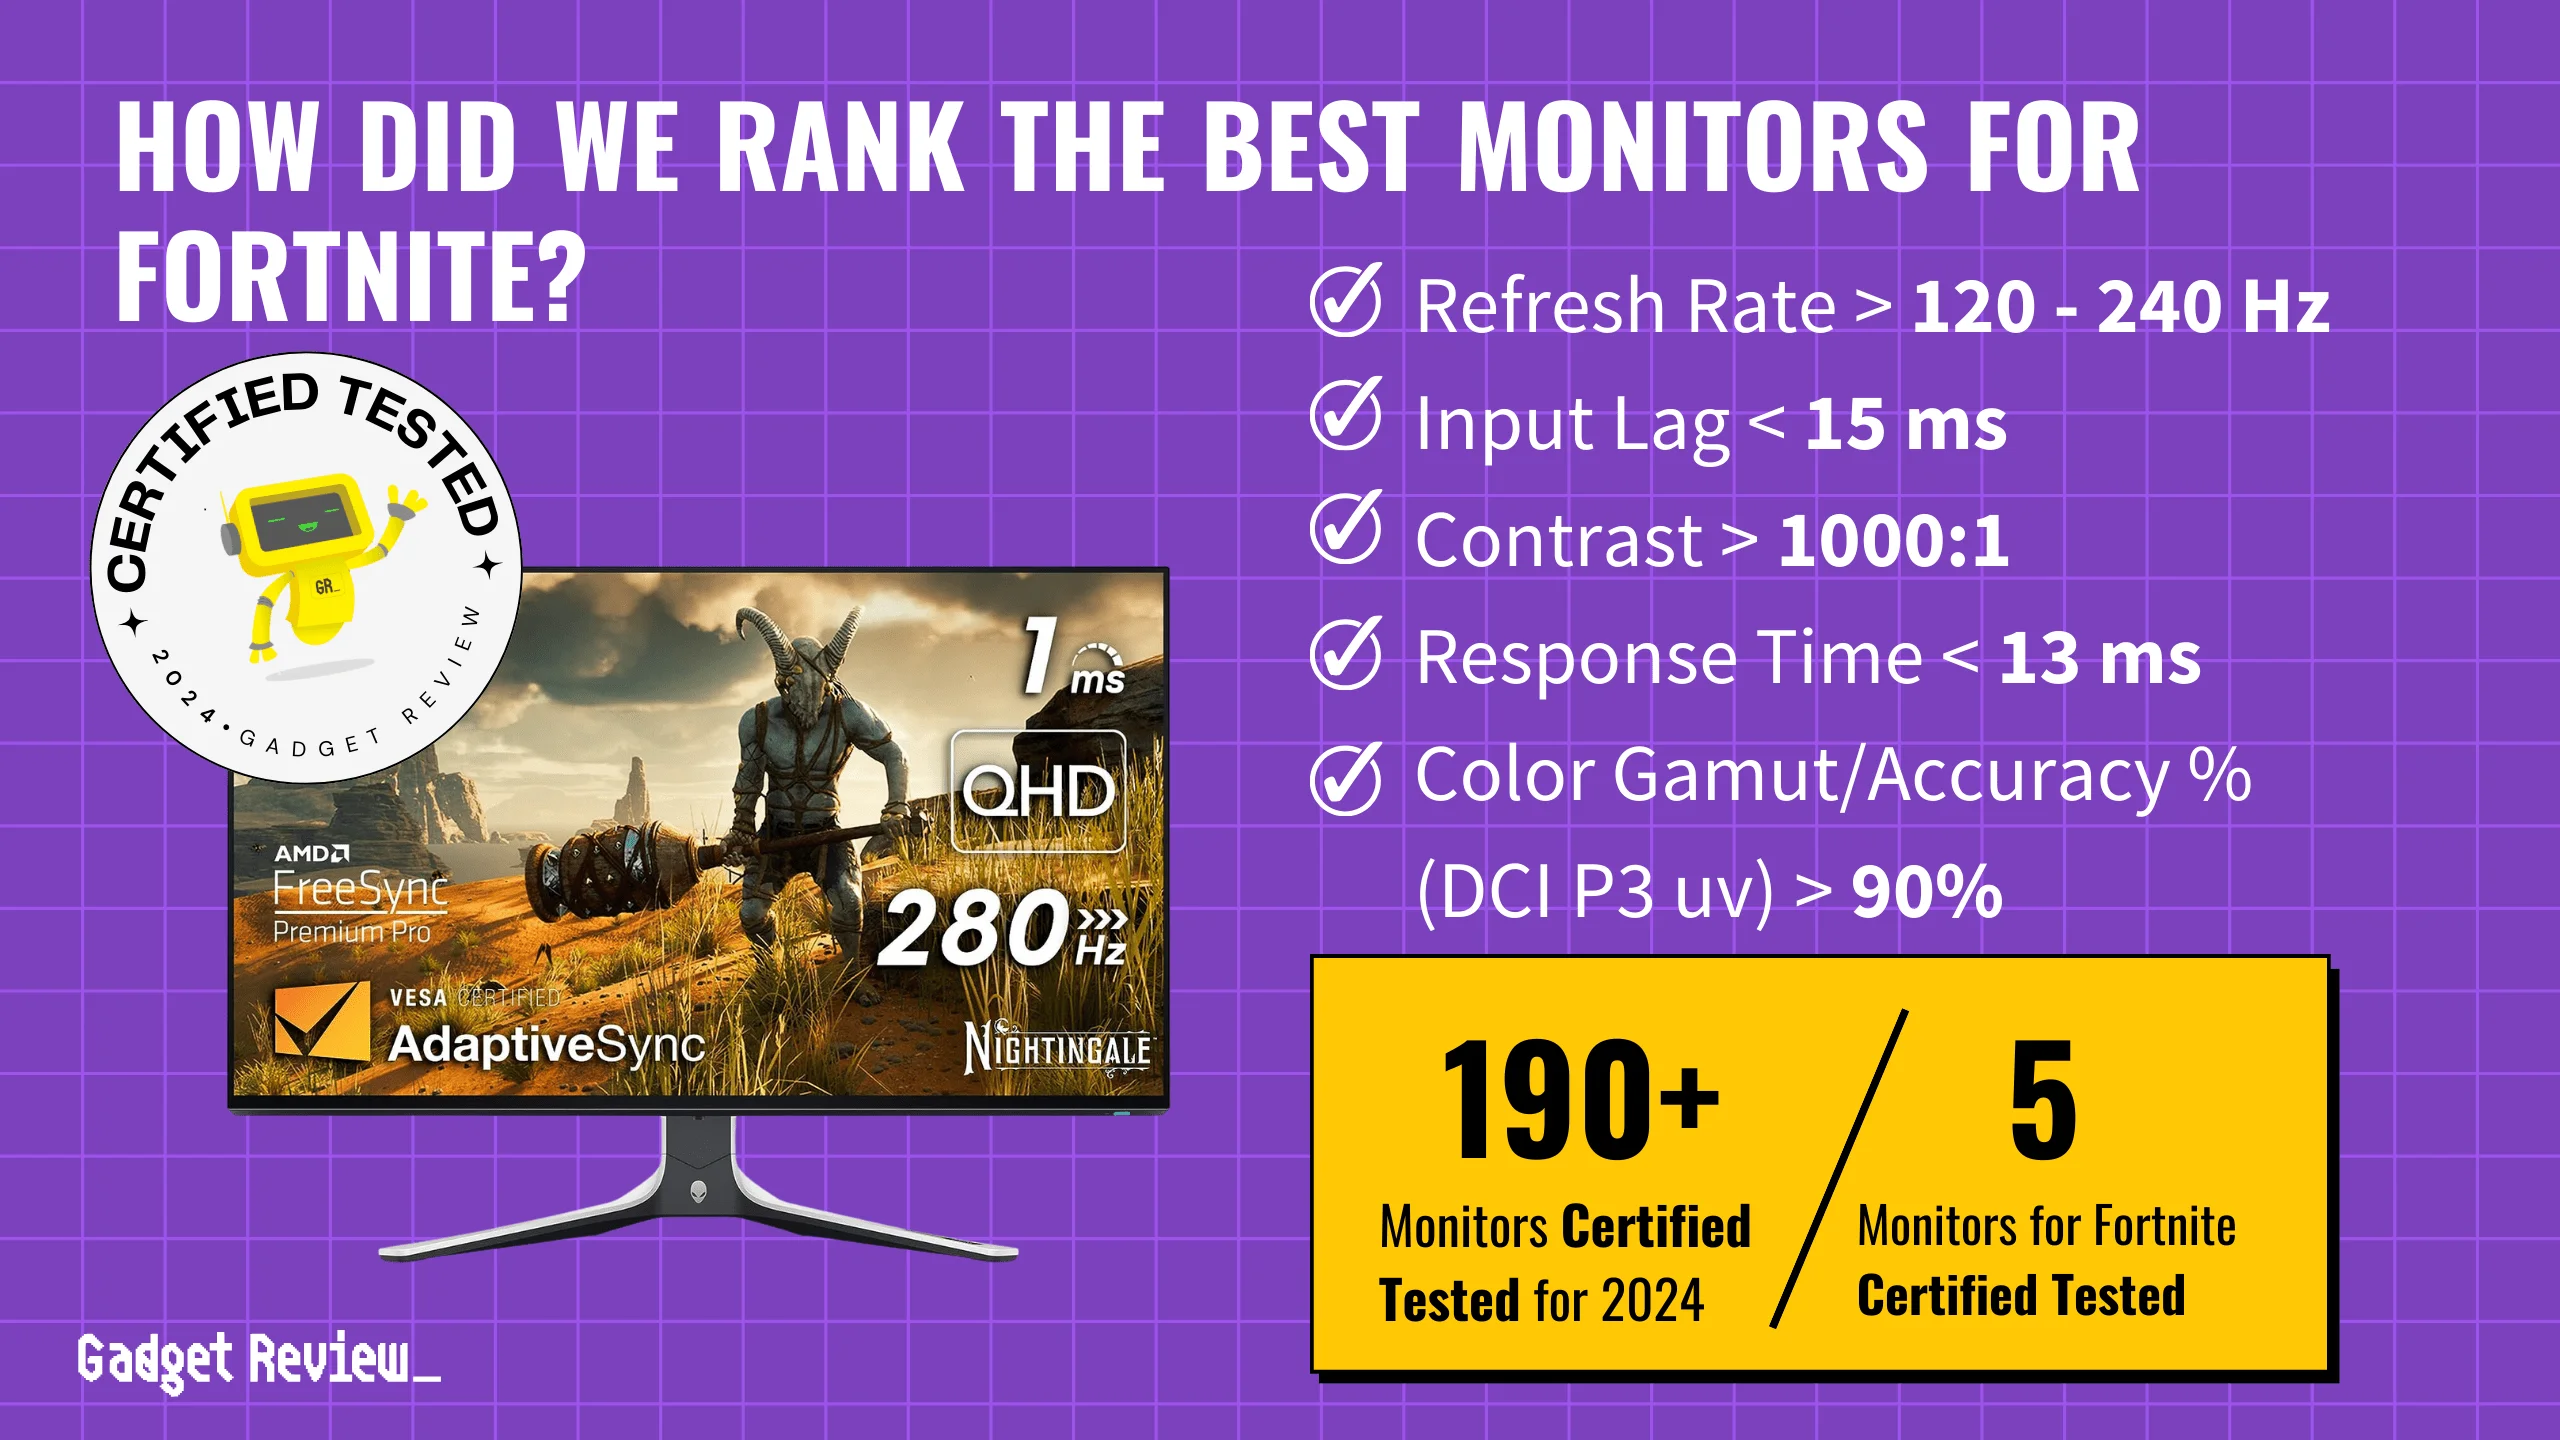 best monitor for fortnite guide that shows the top best gaming monitor model